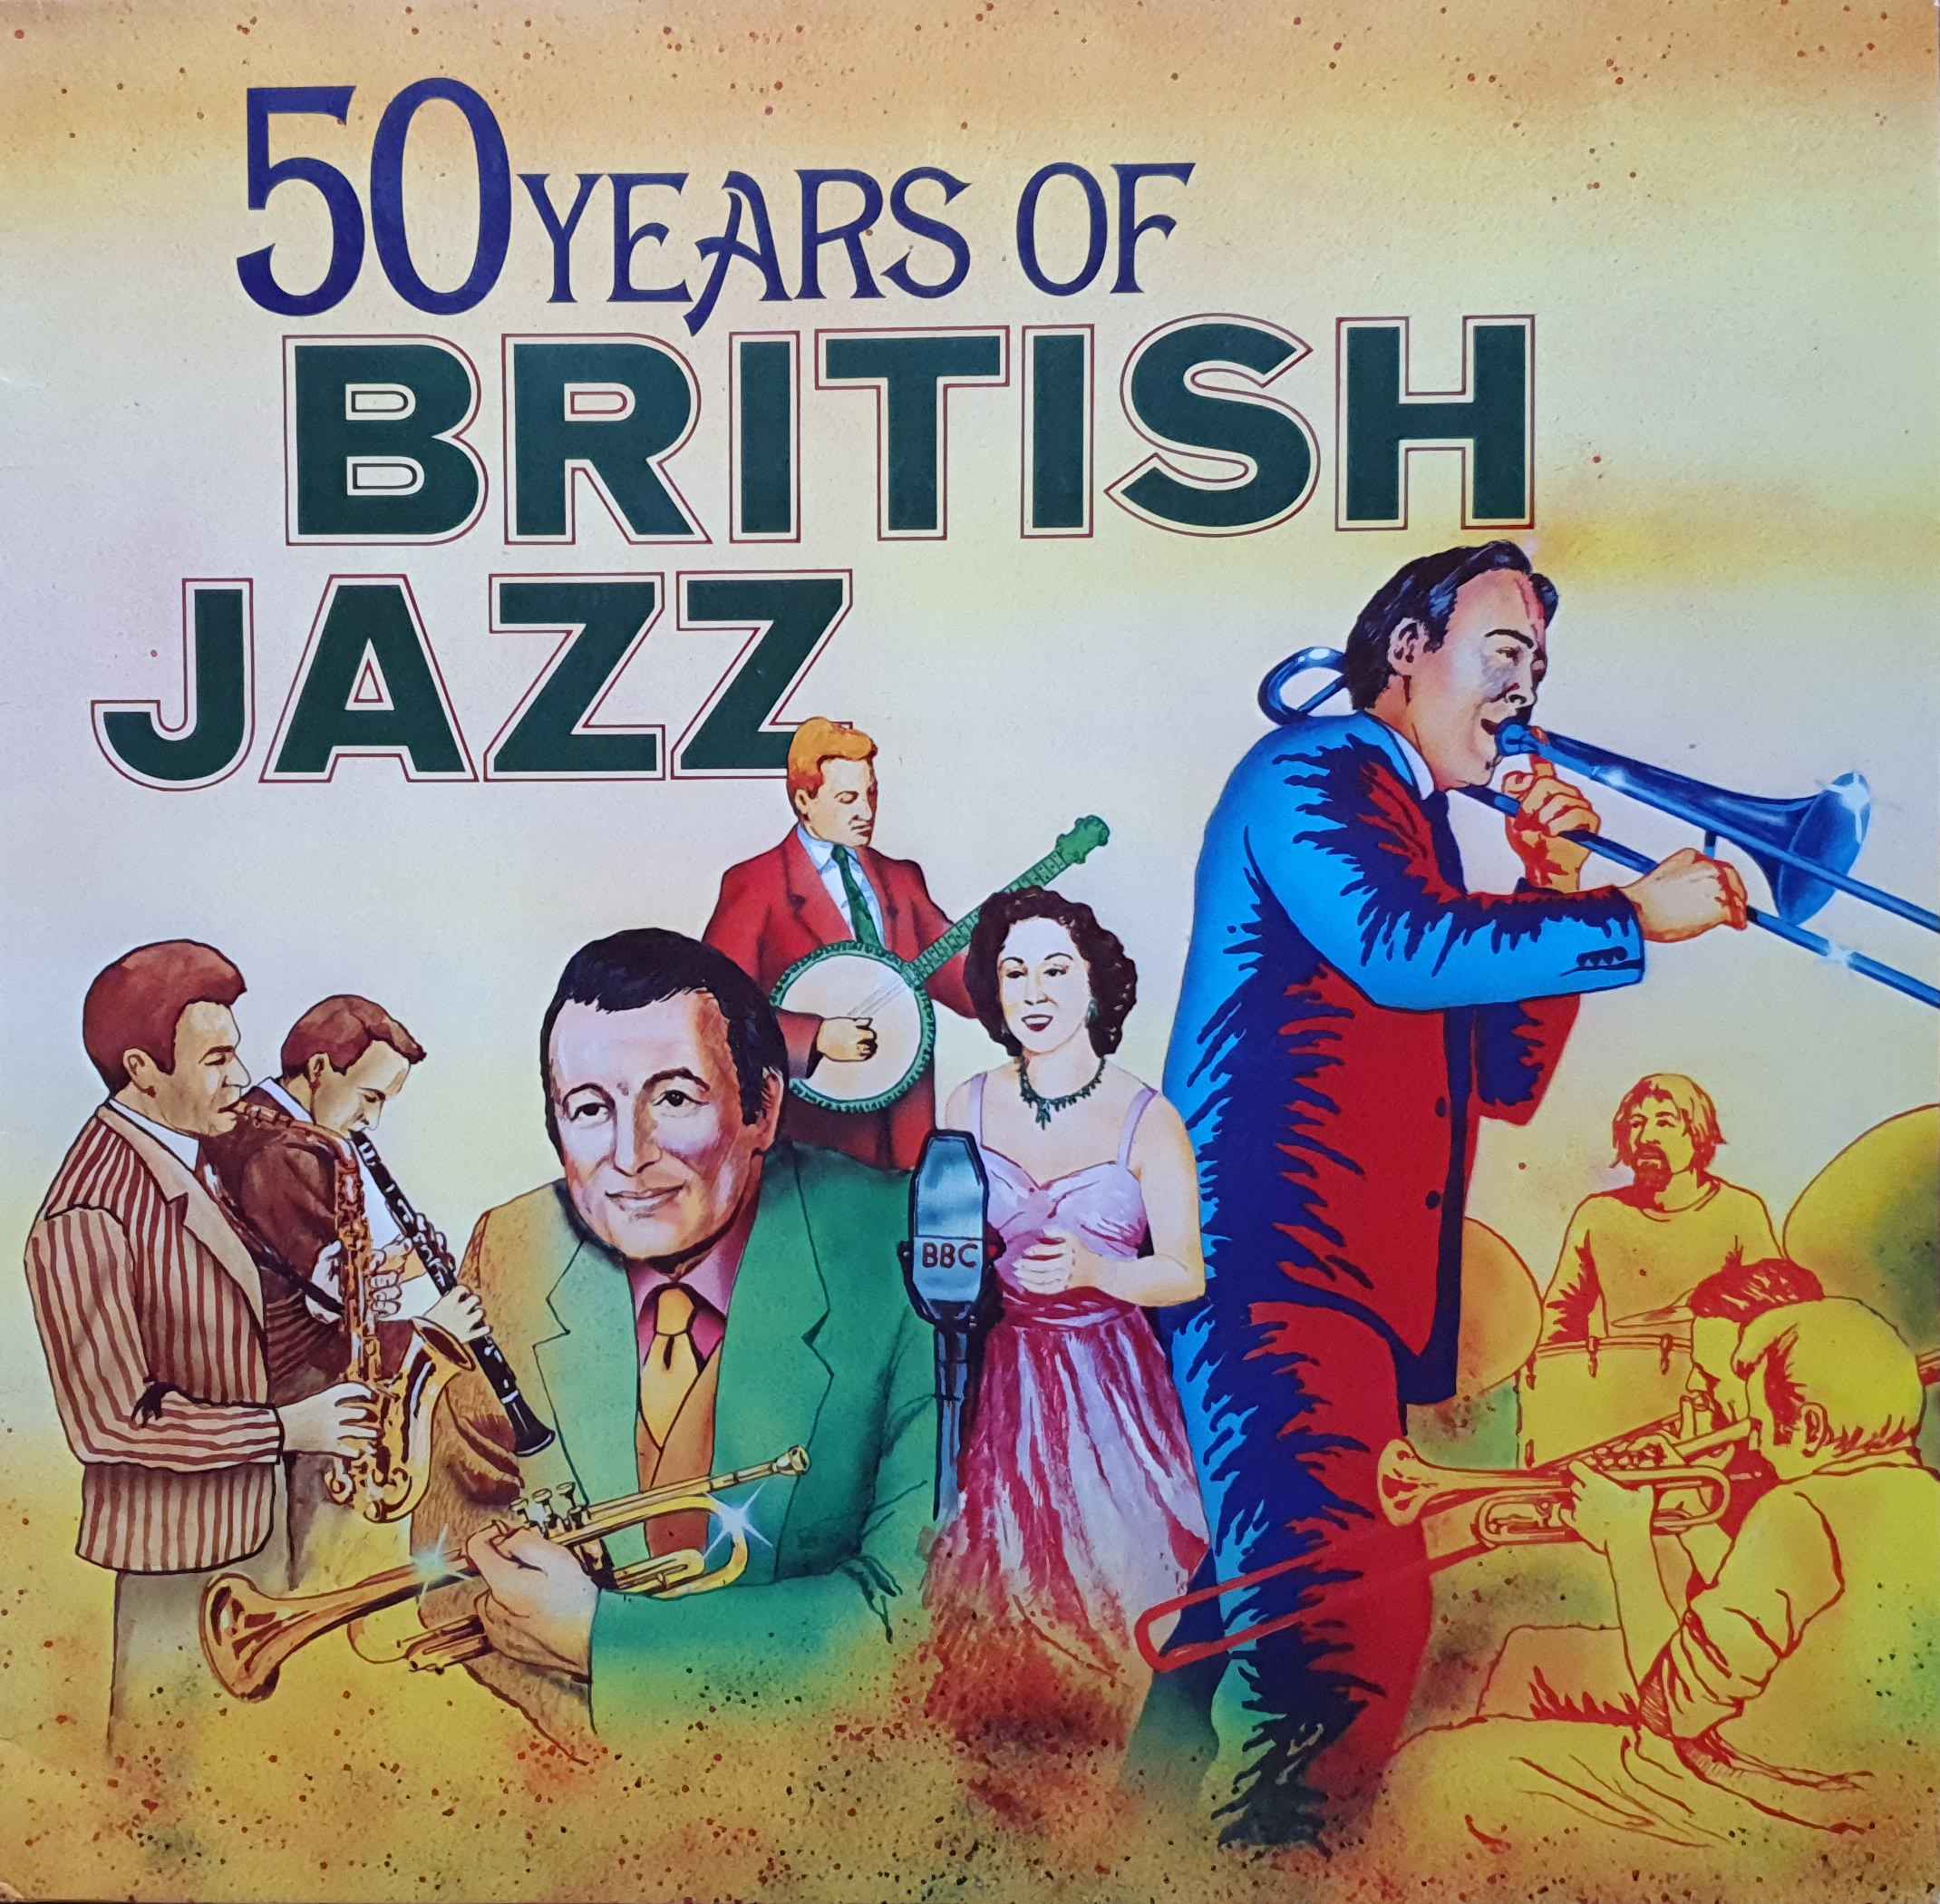 Picture of INT 158.001 50 years of British jazz (German import) by artist Various from the BBC albums - Records and Tapes library